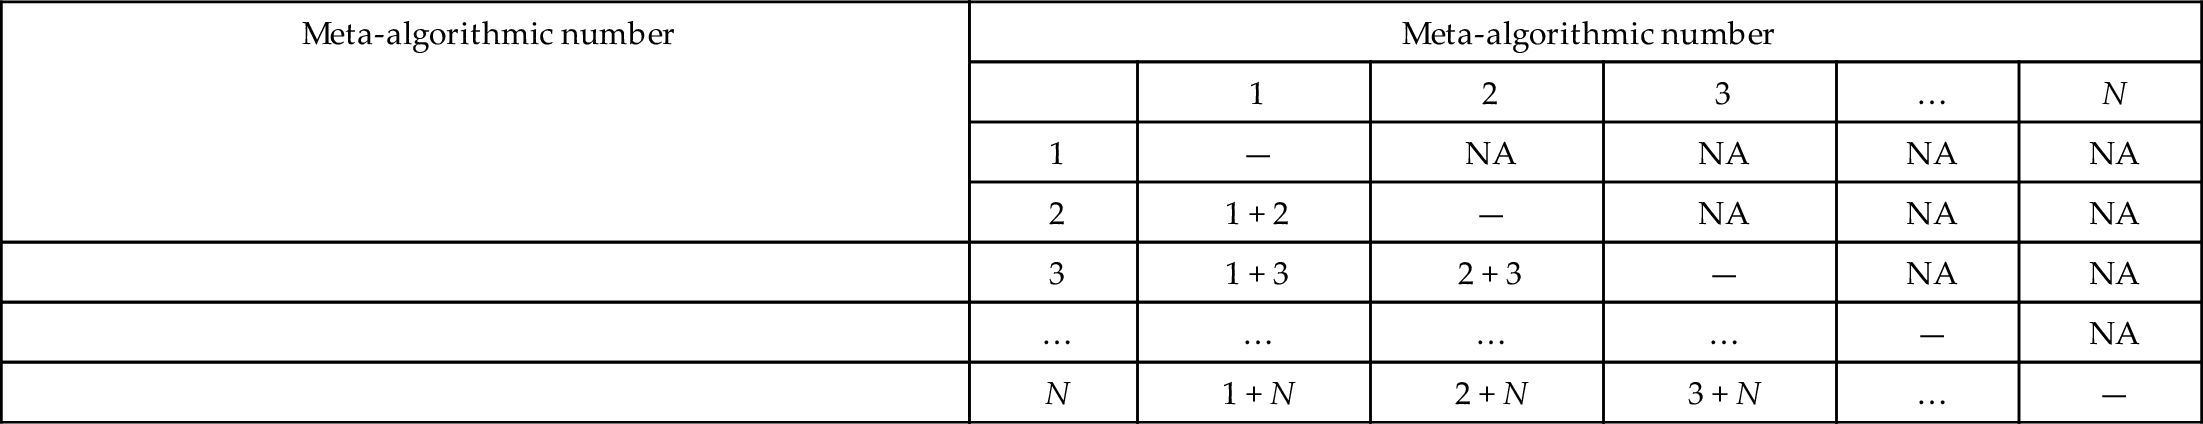 Table 5.2